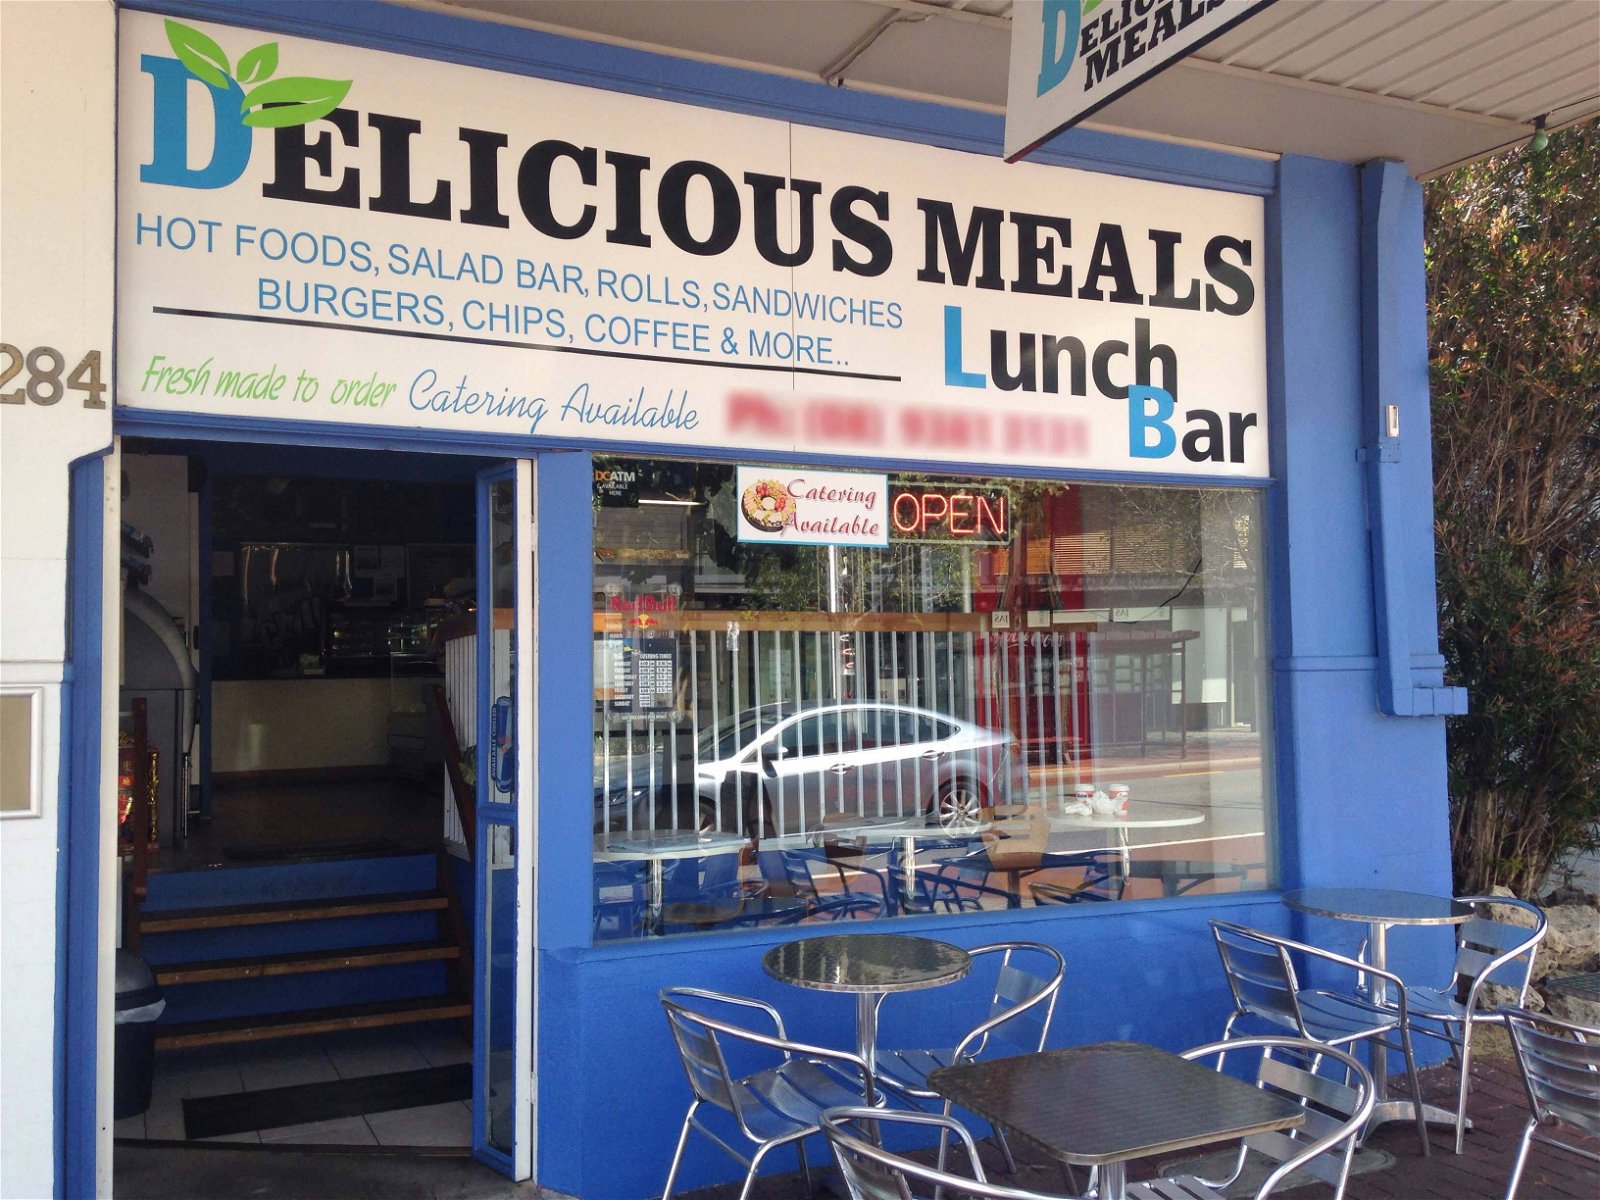 Delicious Meals Lunchbar - Broome Tourism